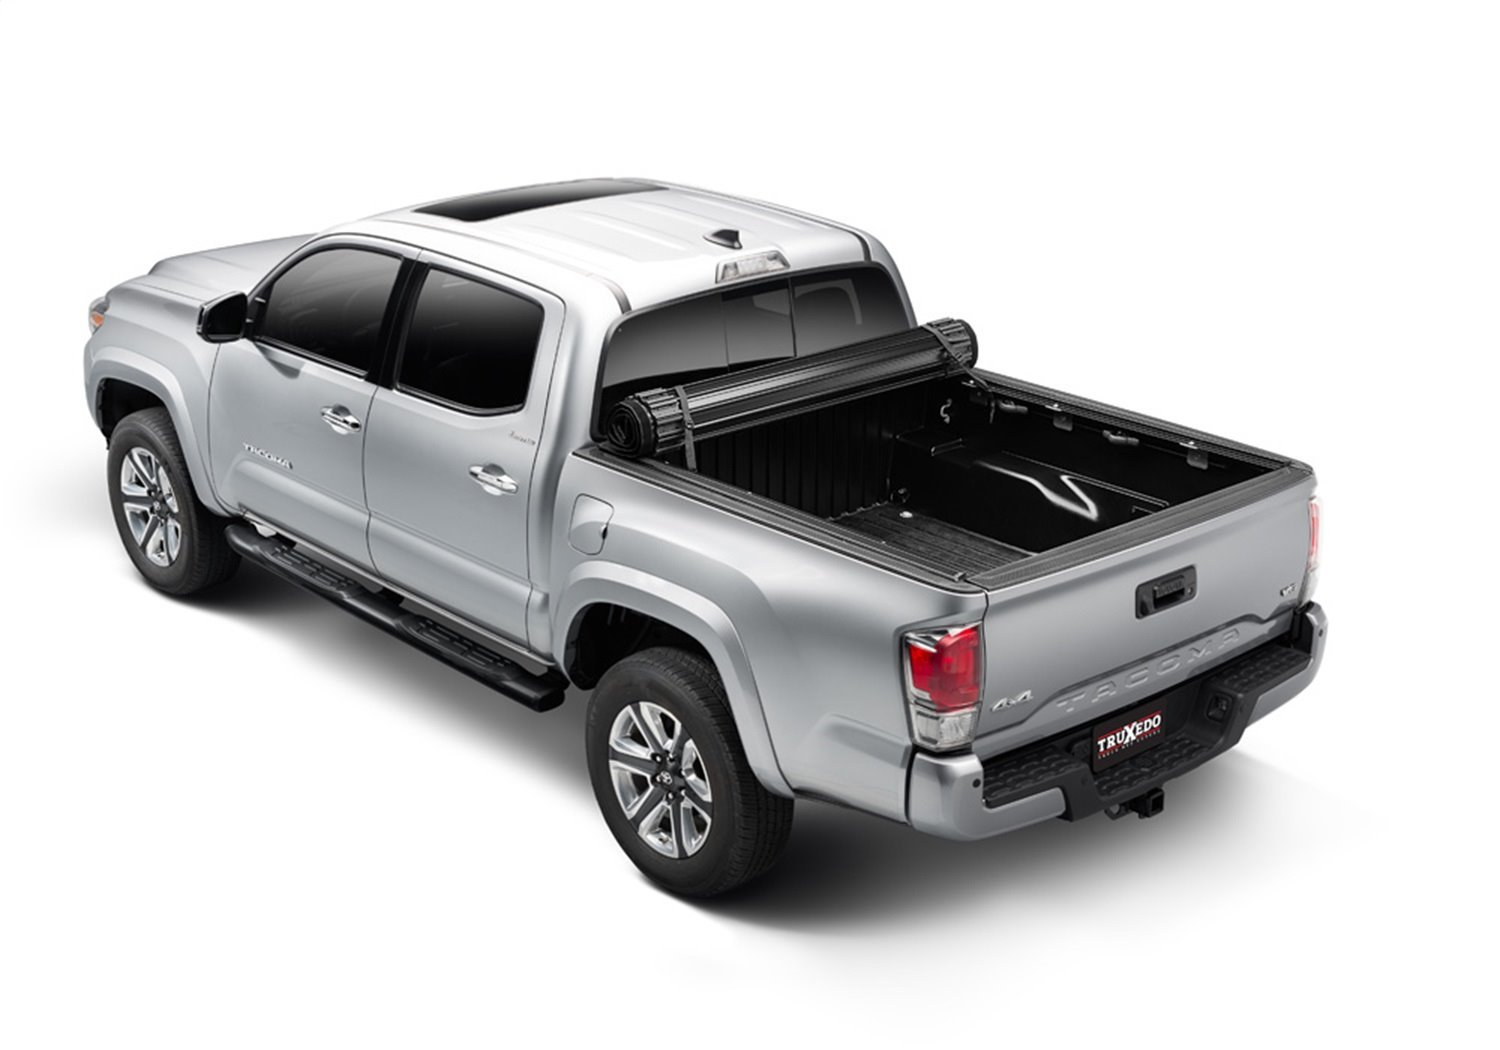 Sentry CT Roll-Up Tonneau Cover Fits Select Toyota Tundra, With Deck Rail System, Bed Length: 6 ft. 6 in.